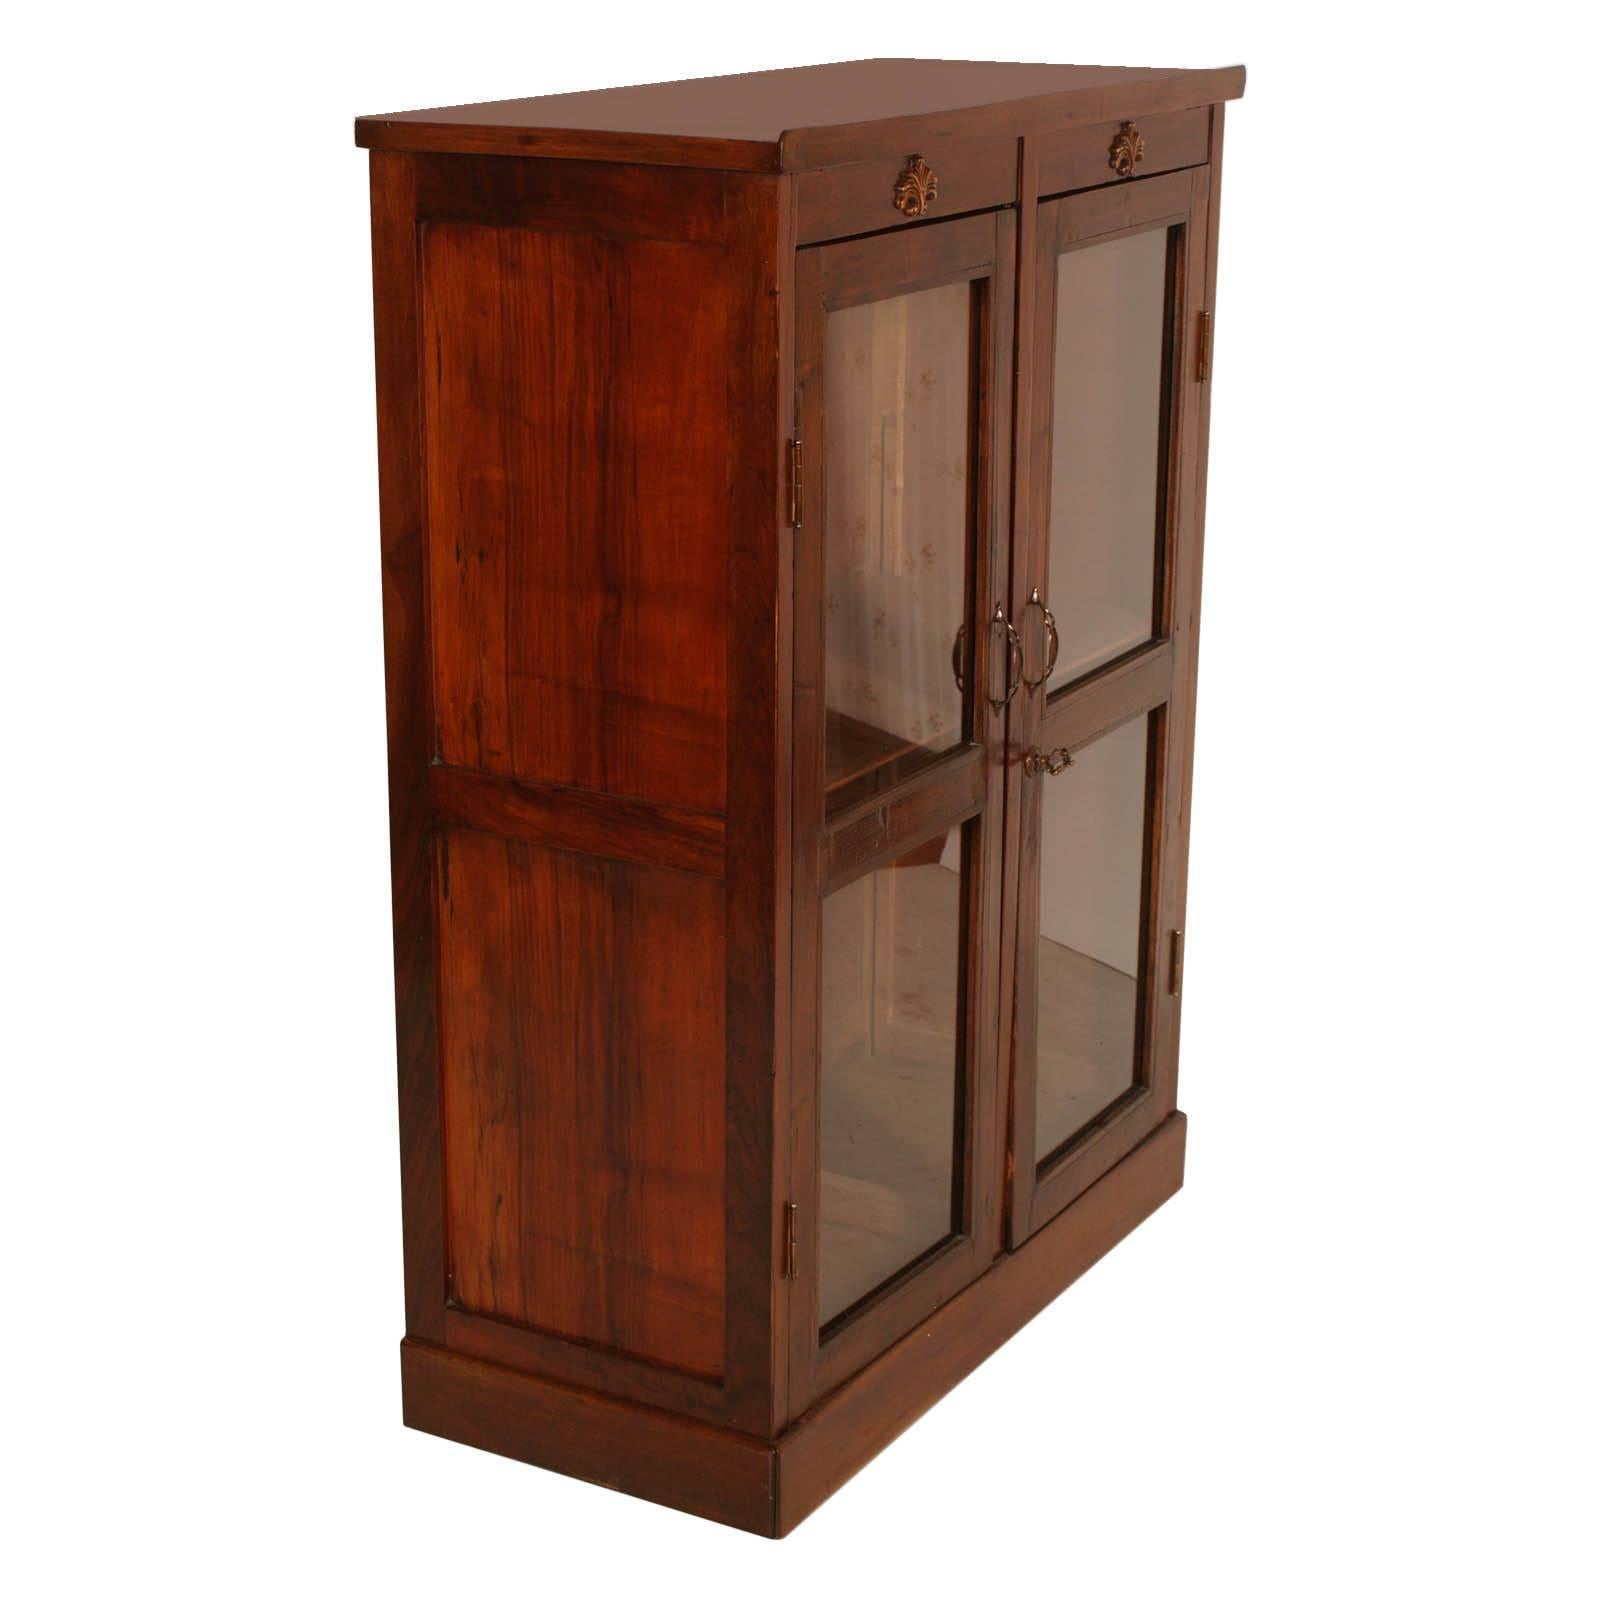 Late '800 display cabinet, buffet, in walnut. With two glass doors, large compartment with internal shelf and with secret with two compartments on the top that can be opened from the back. Cabinet restored and polished to wax in good conditions.